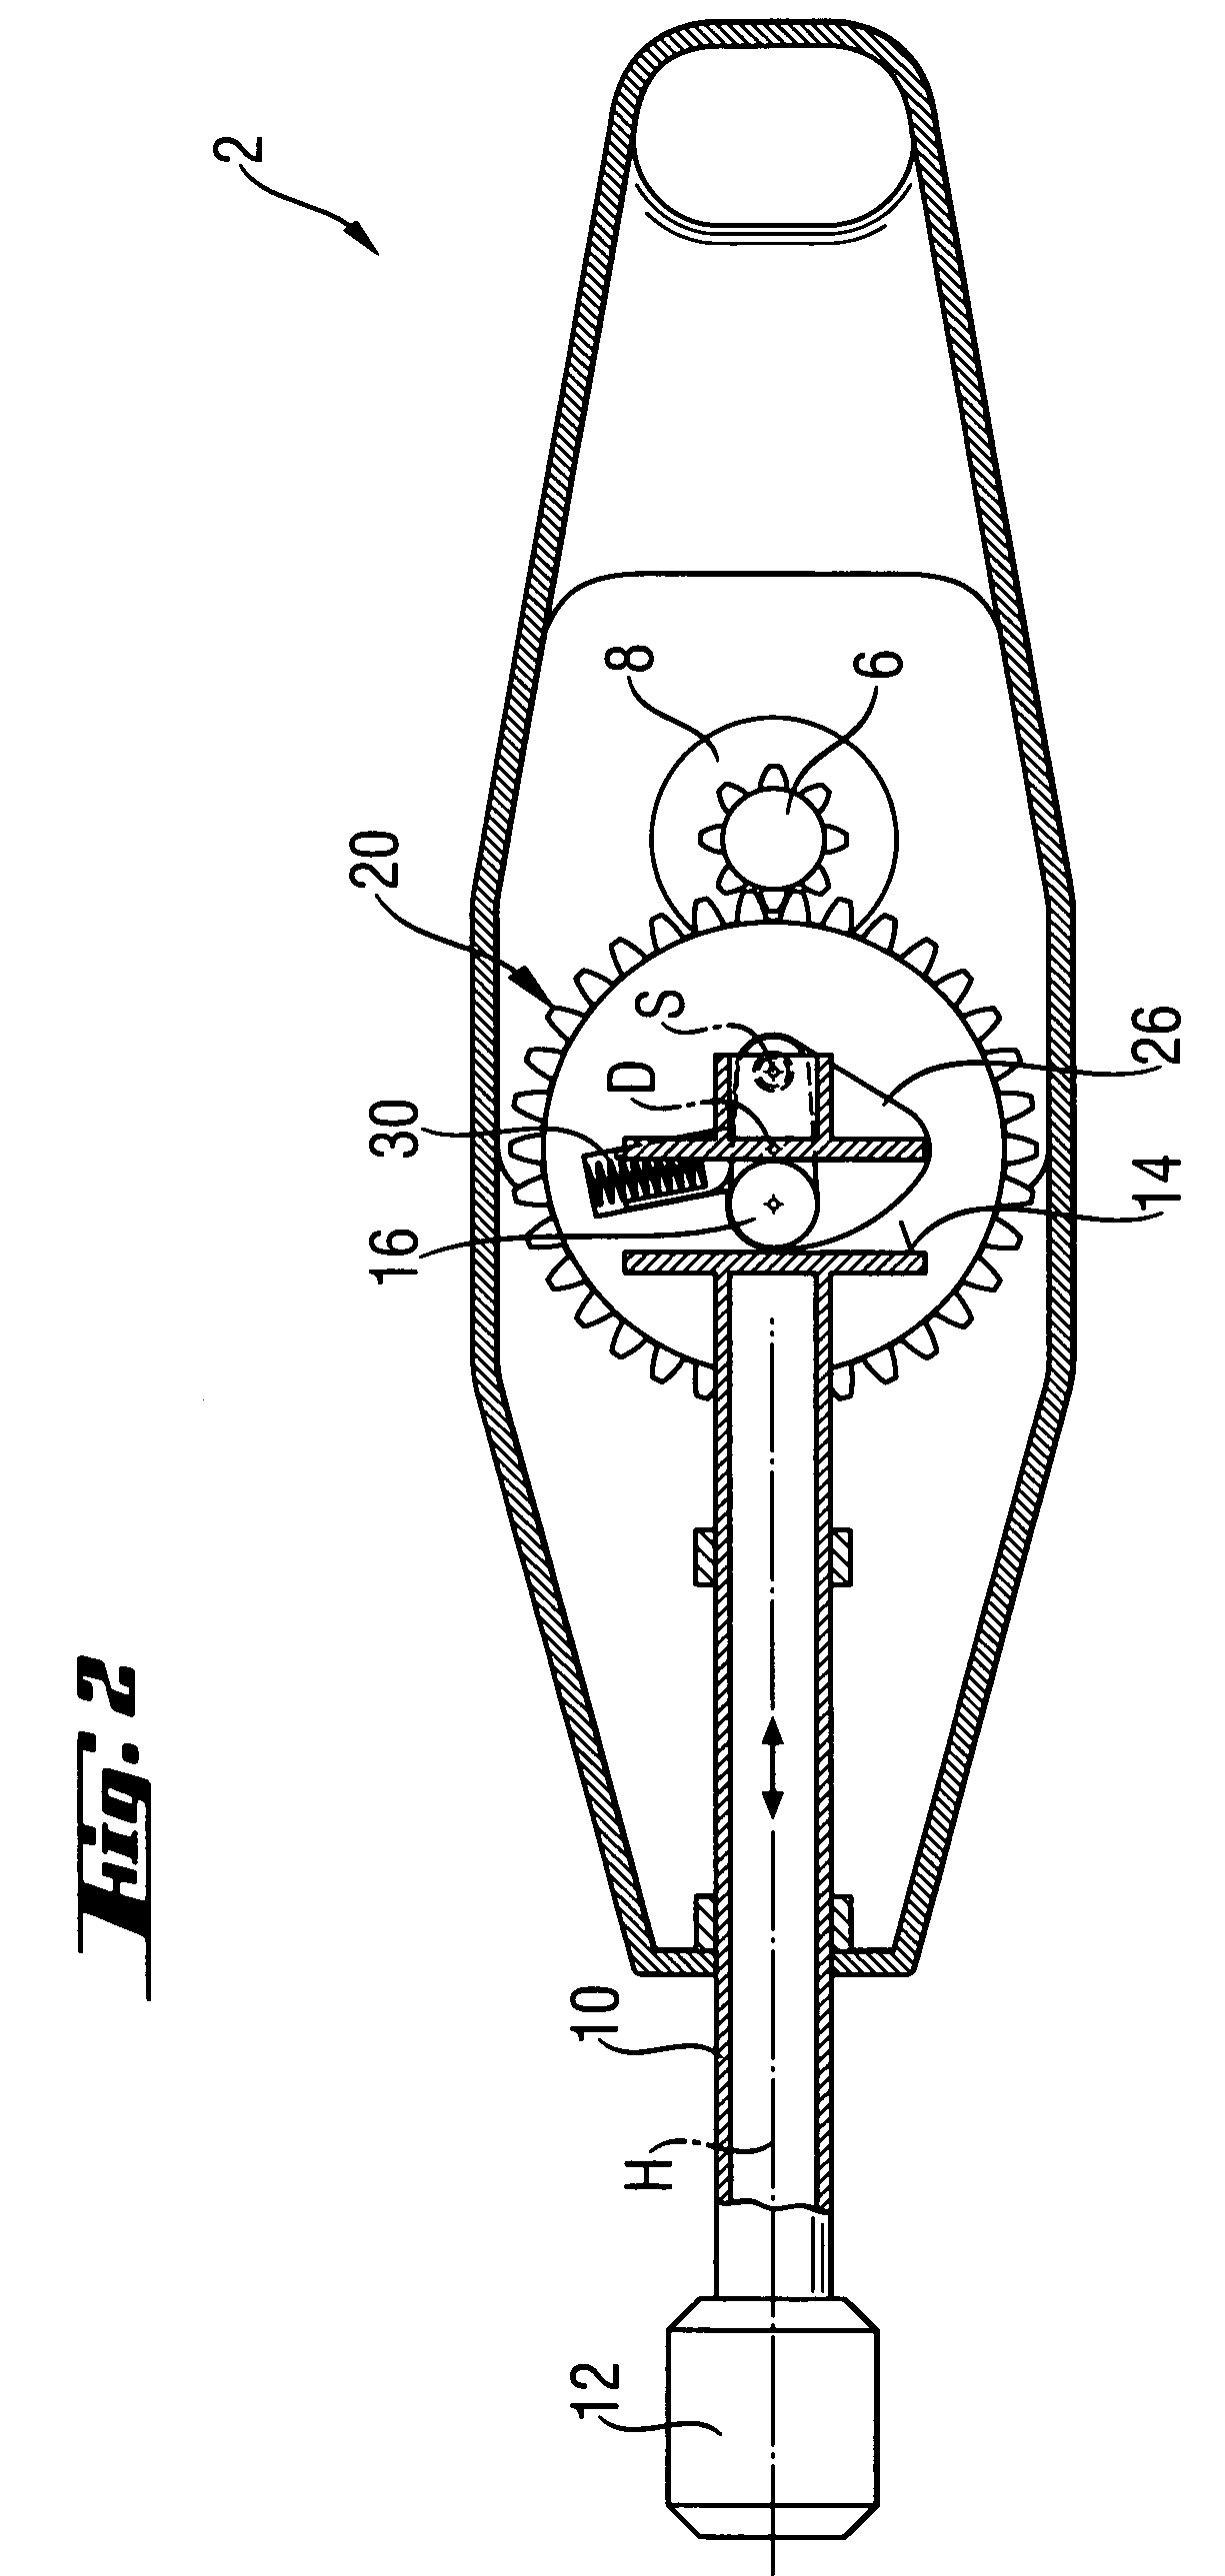 Movement conversion device for a hand-held power tool